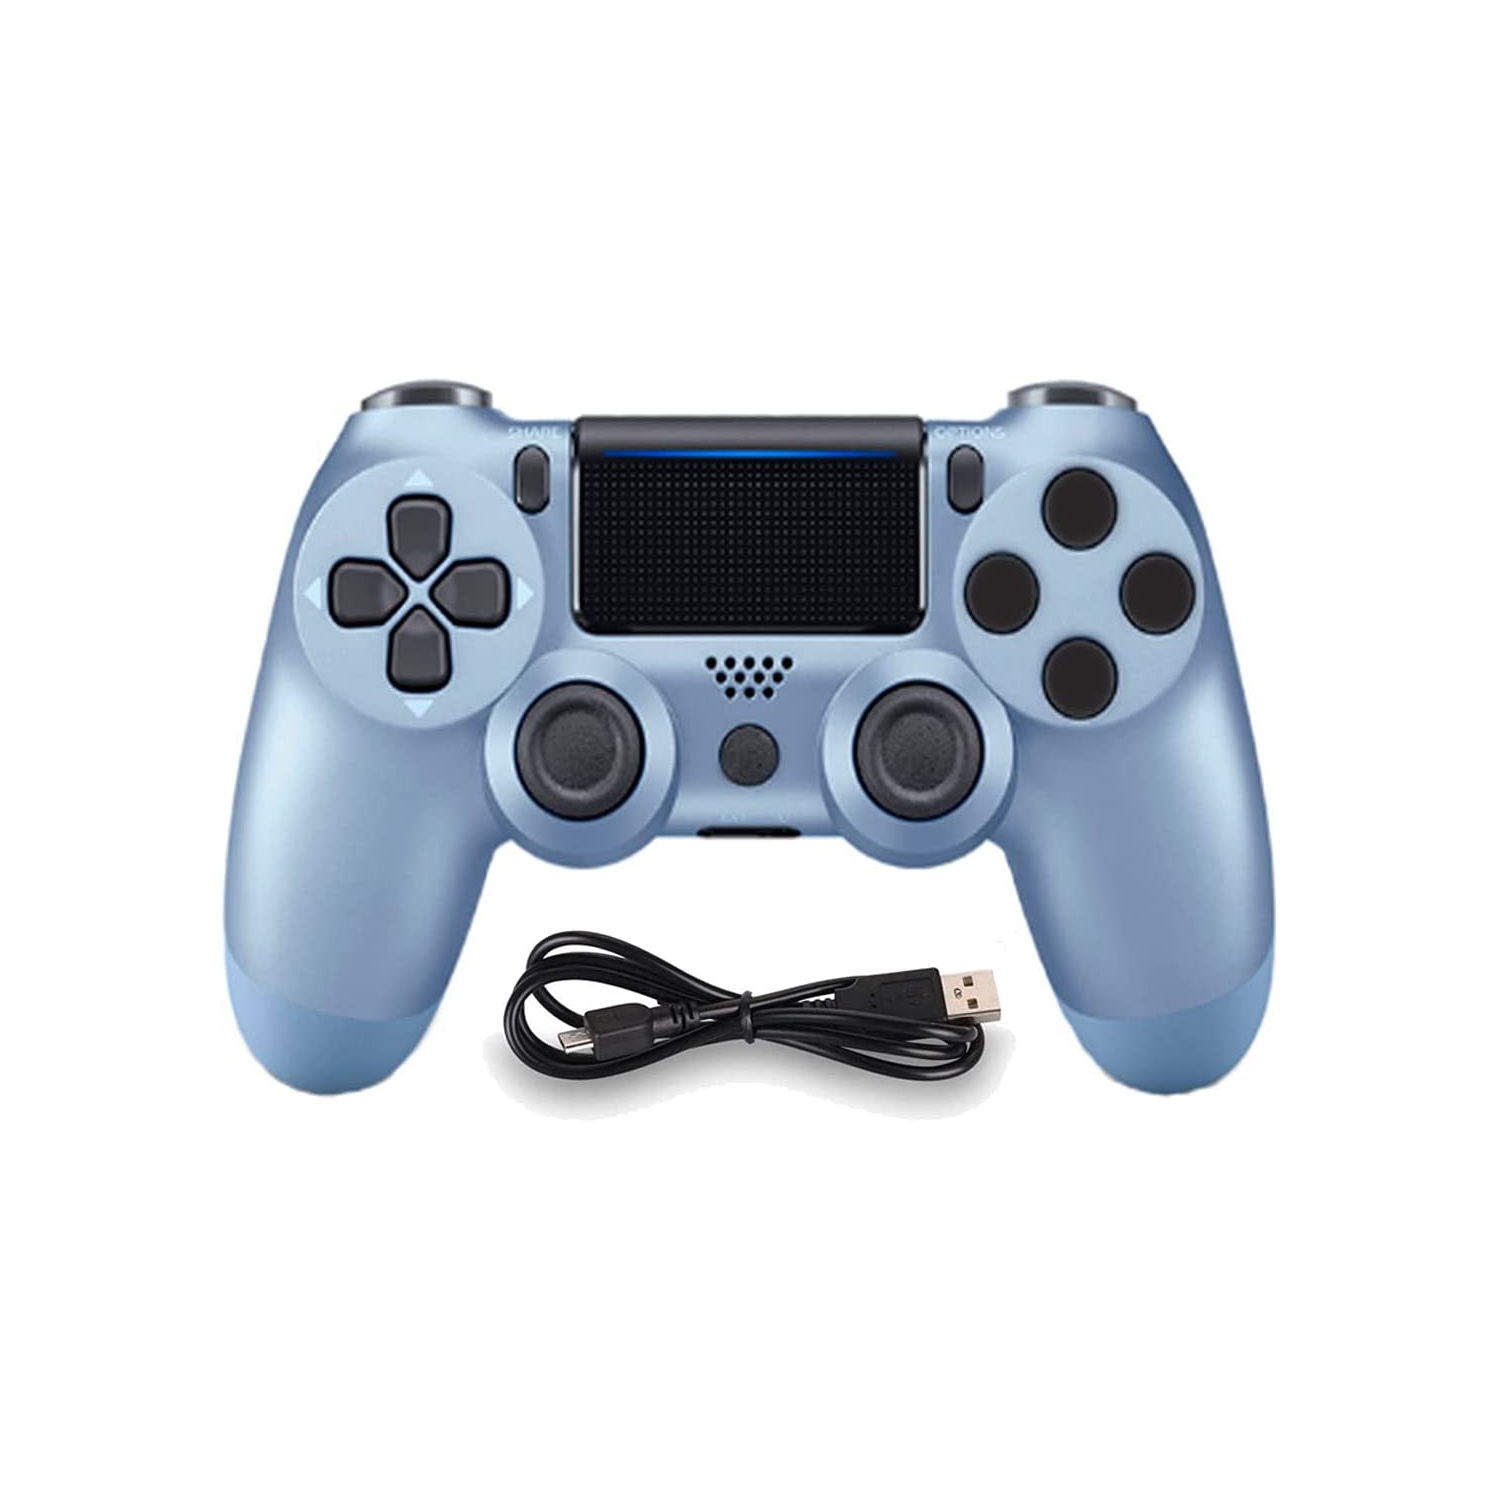 Wireless Controller Compatible for PS4 Playstation 4 / Slim/Pro Console, Double Vibration, 6-Axis Gyro Sensor, Speaker, Built-in Audio Jack with Charging Cable (Titanium Blue)